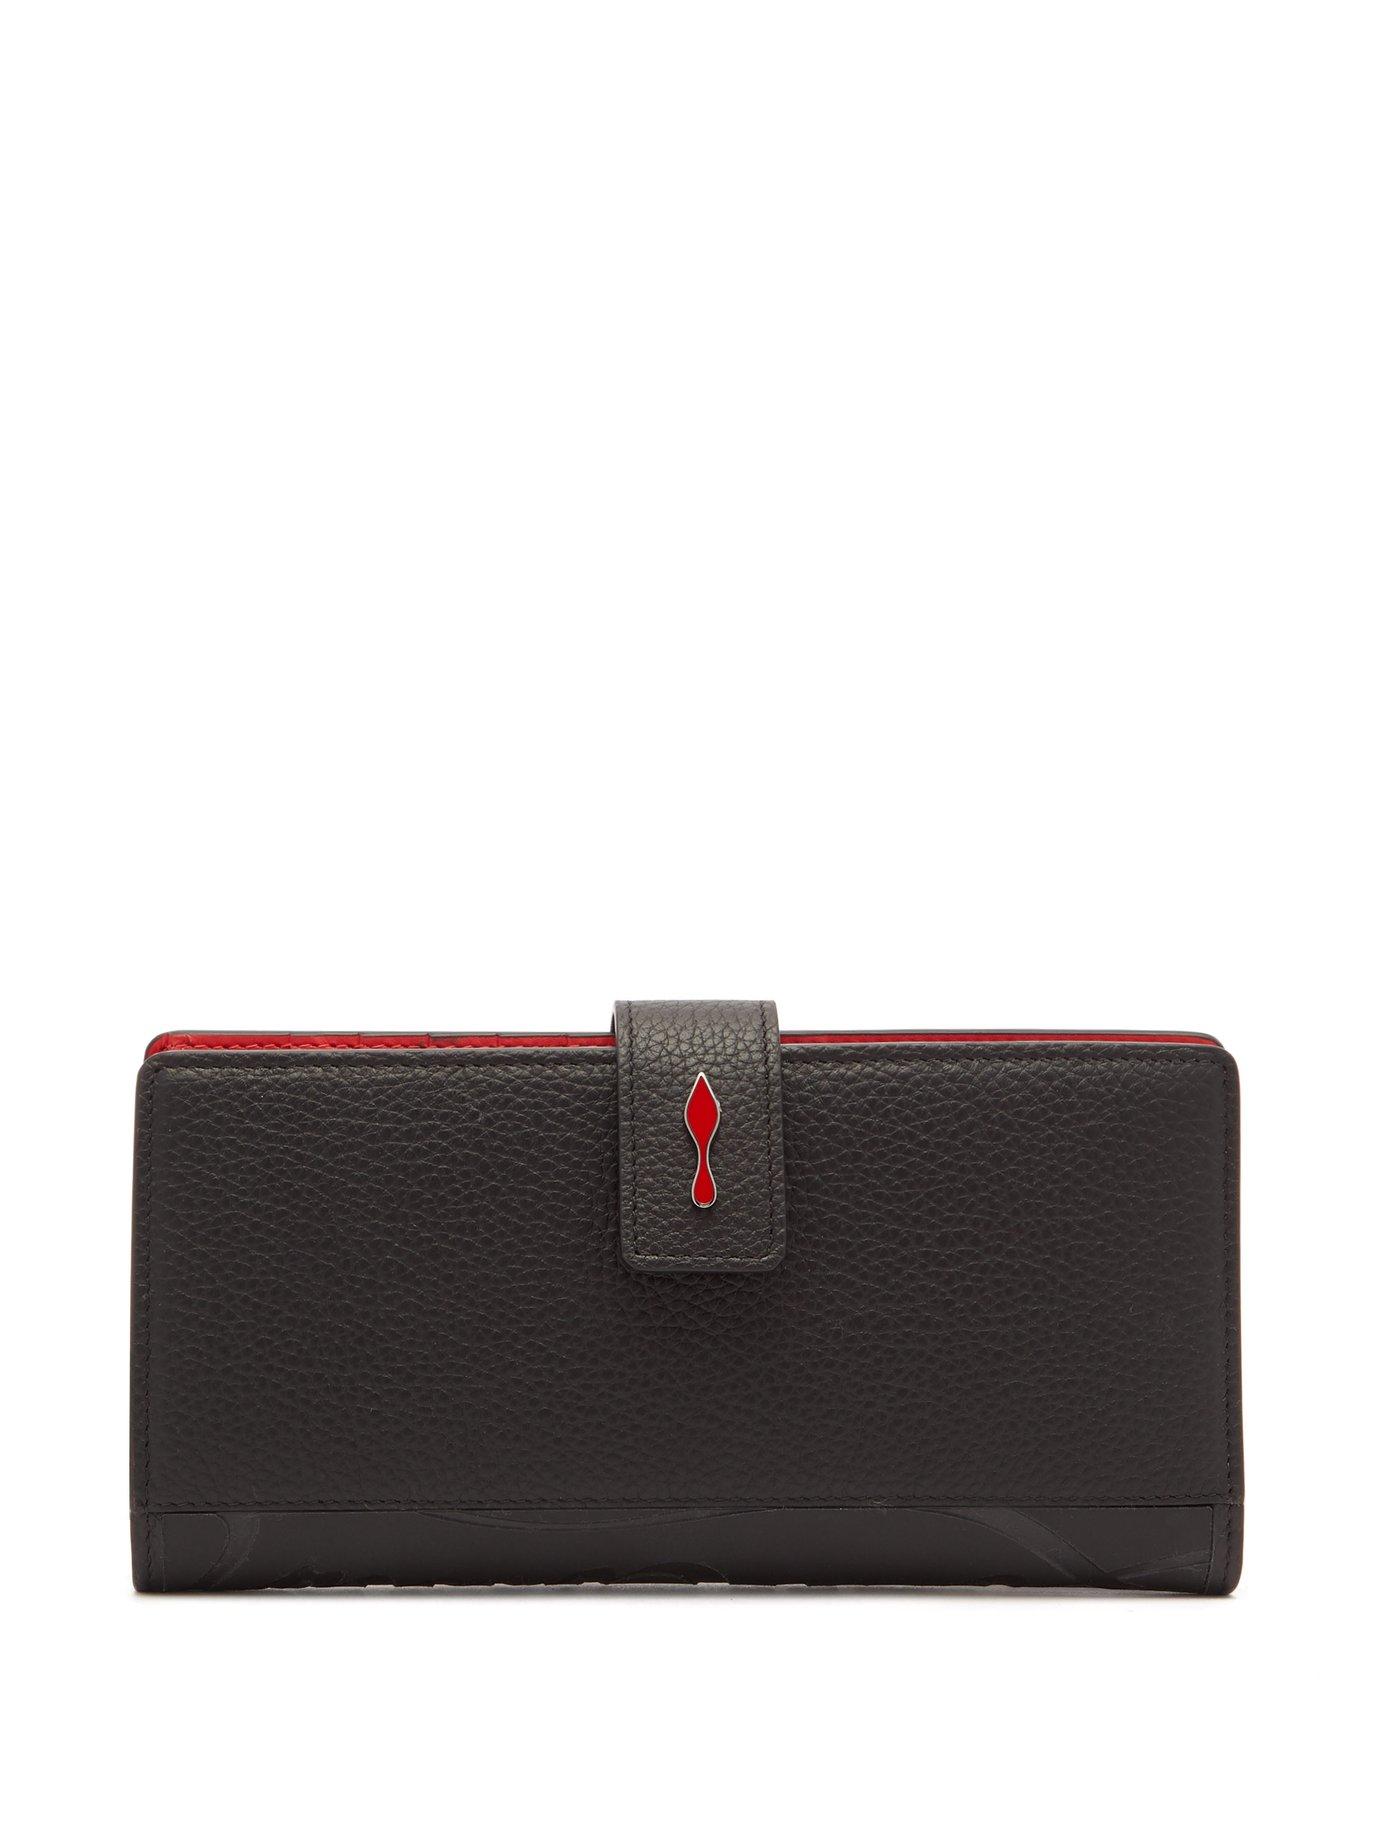 Christian Louboutin Paloma Continental Leather Wallet in Black | Lyst